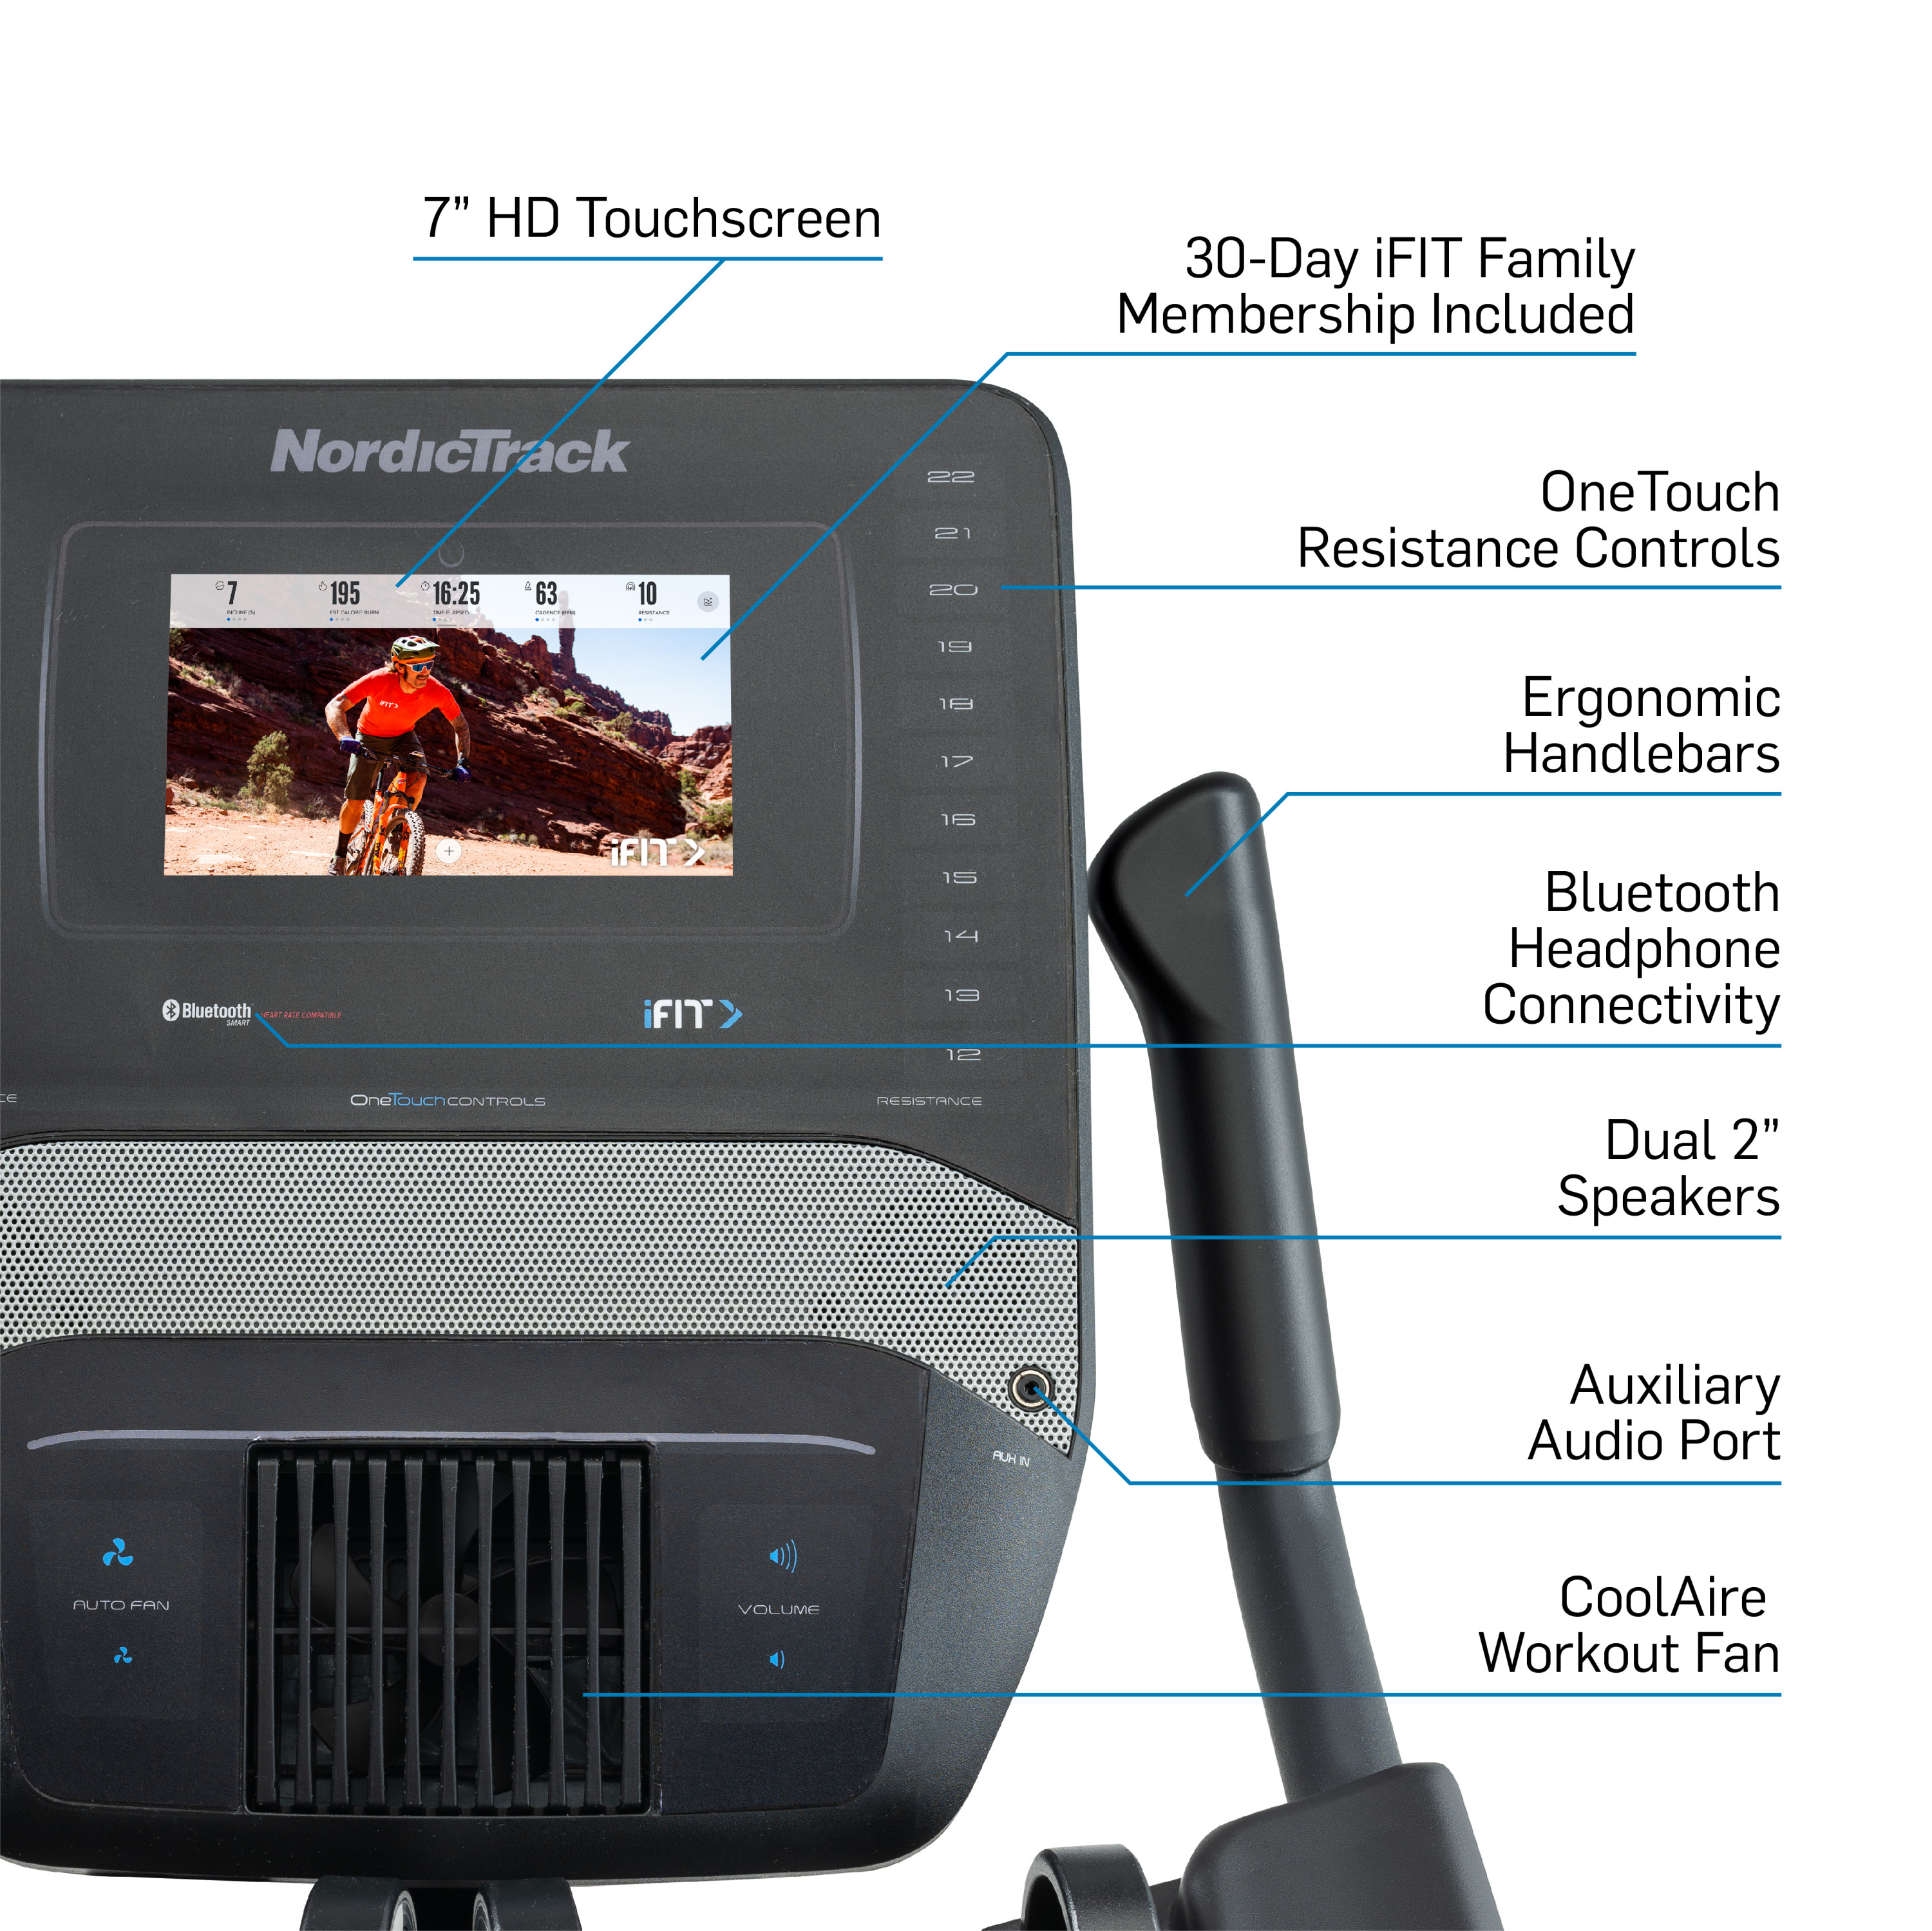 NordicTrack Studio Bike with 7” Smart HD Touchscreen and 30-Day iFIT Family Membership - image 3 of 22